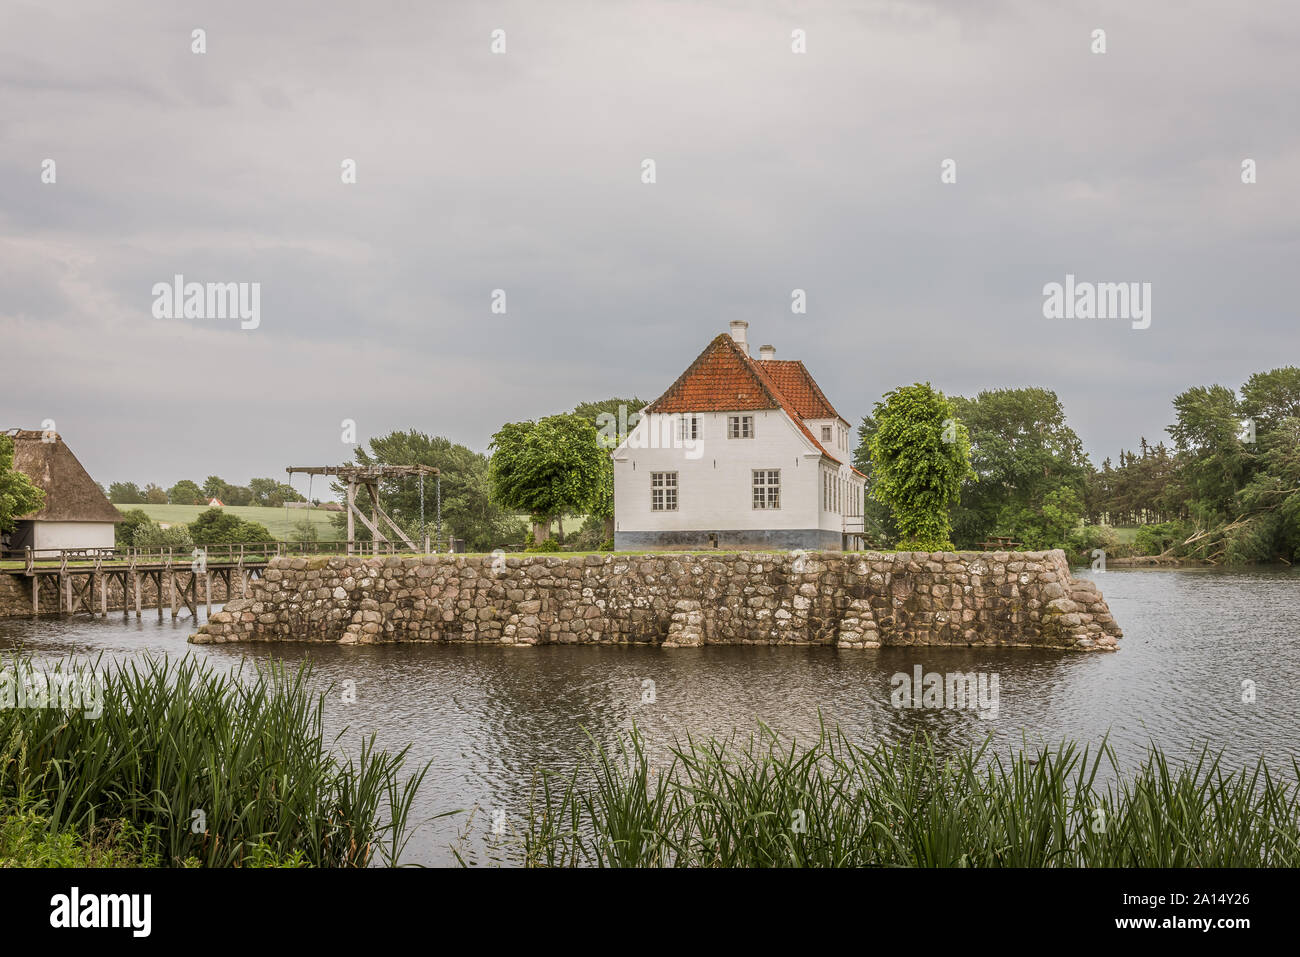 the beautiful mansion house Søbygaard in the island of Ærø in Denmark, July 13, 2019 Stock Photo